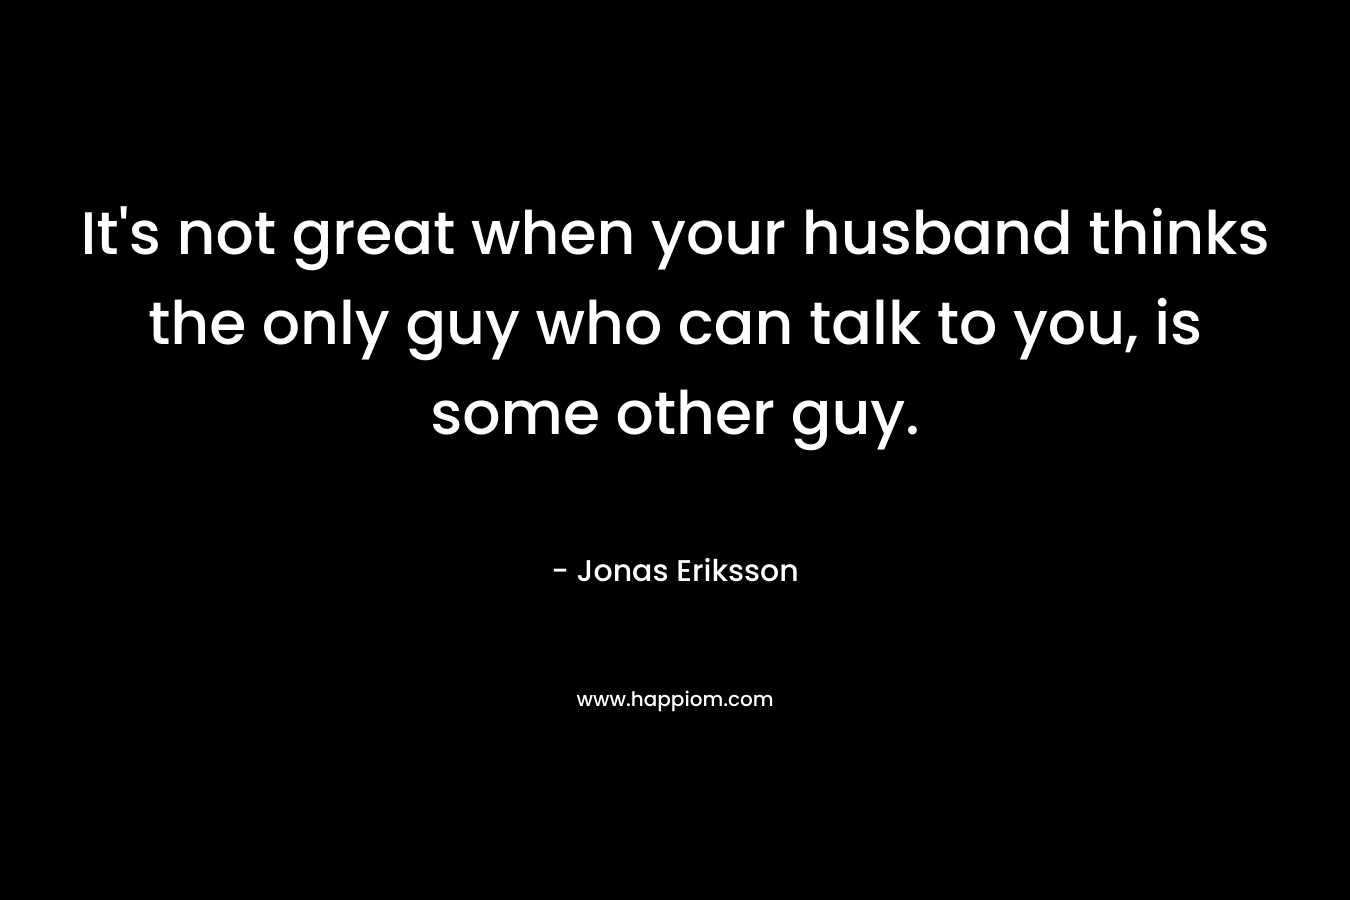 It’s not great when your husband thinks the only guy who can talk to you, is some other guy. – Jonas Eriksson